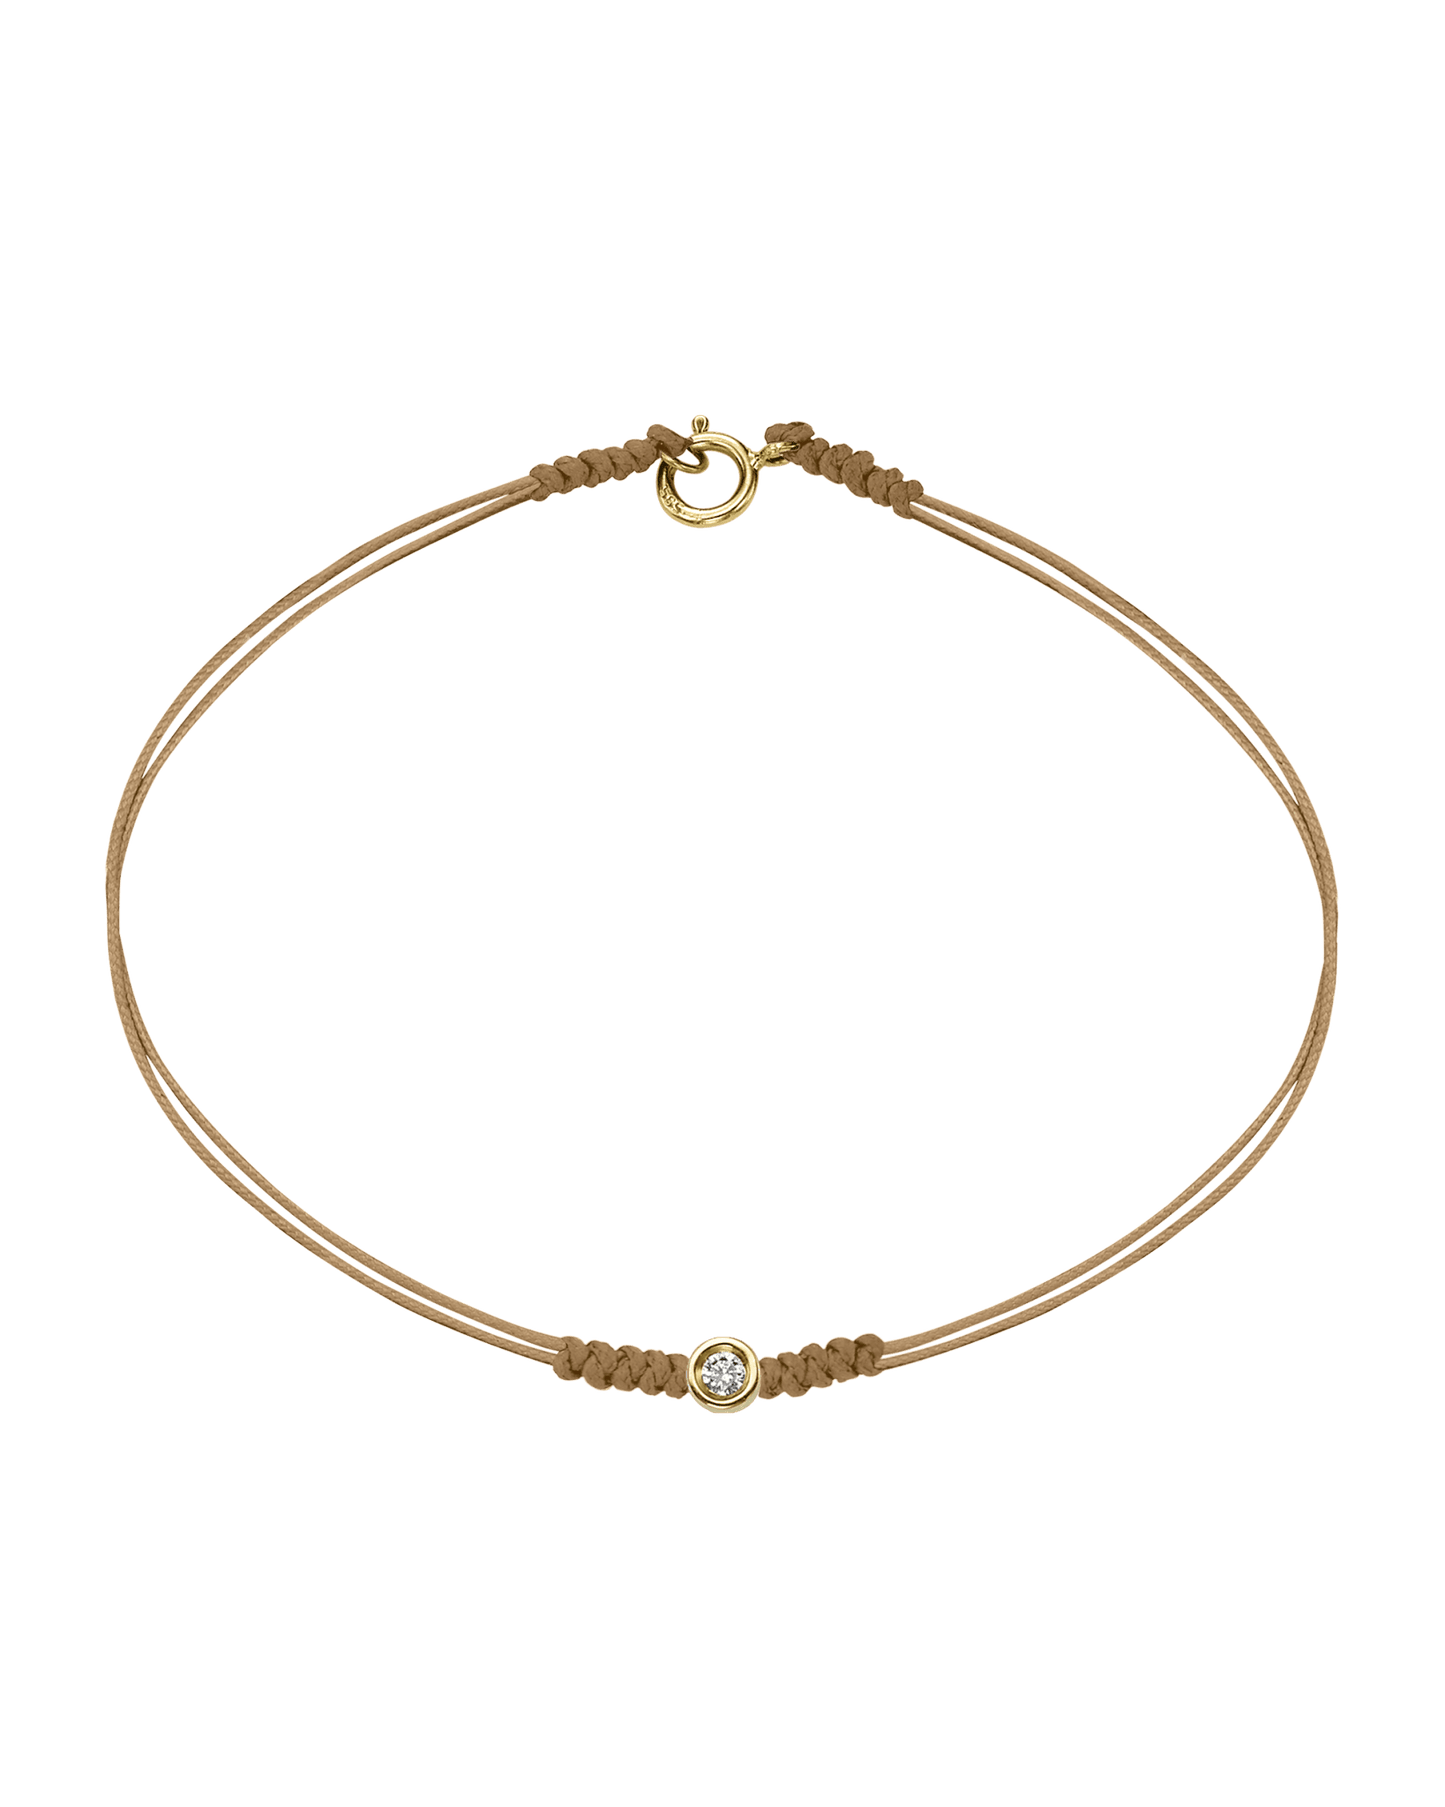 The Classic String of Love with clasp - 14K Yellow Gold Bracelets 14K Solid Gold Camel Small: 0.03ct Small - 6 Inches (15.5cm)